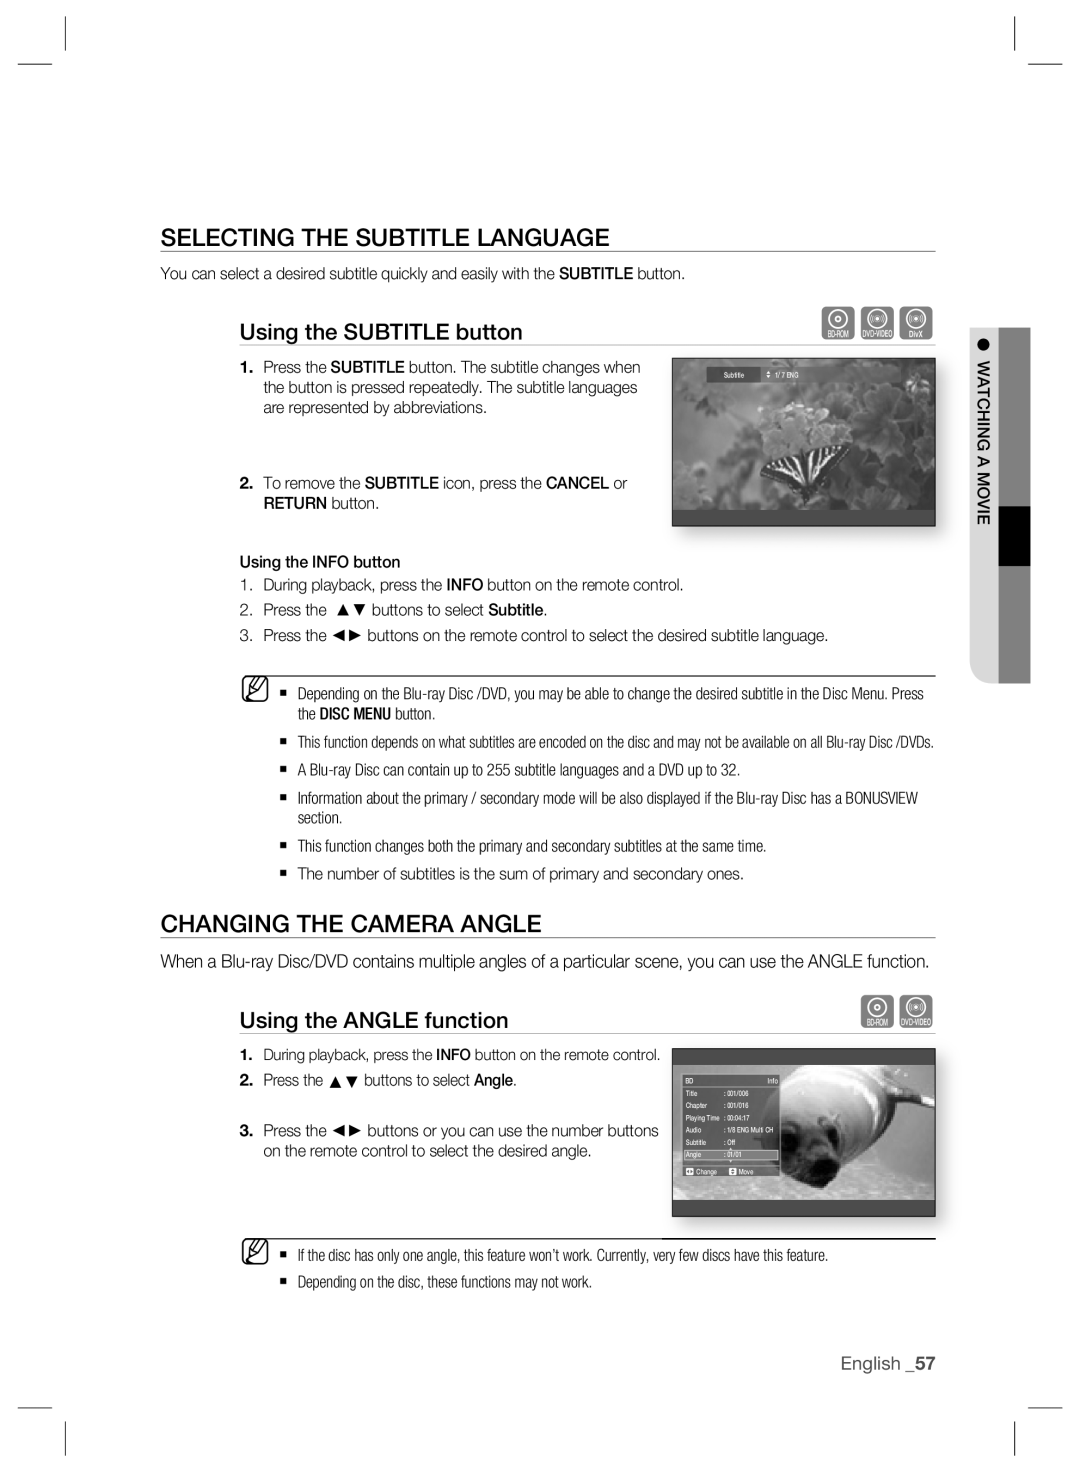 Samsung BD-P2500/EDC manual Selecting The Subtitle Language, Changing The Camera Angle, Using the SUBTITLE button, English 